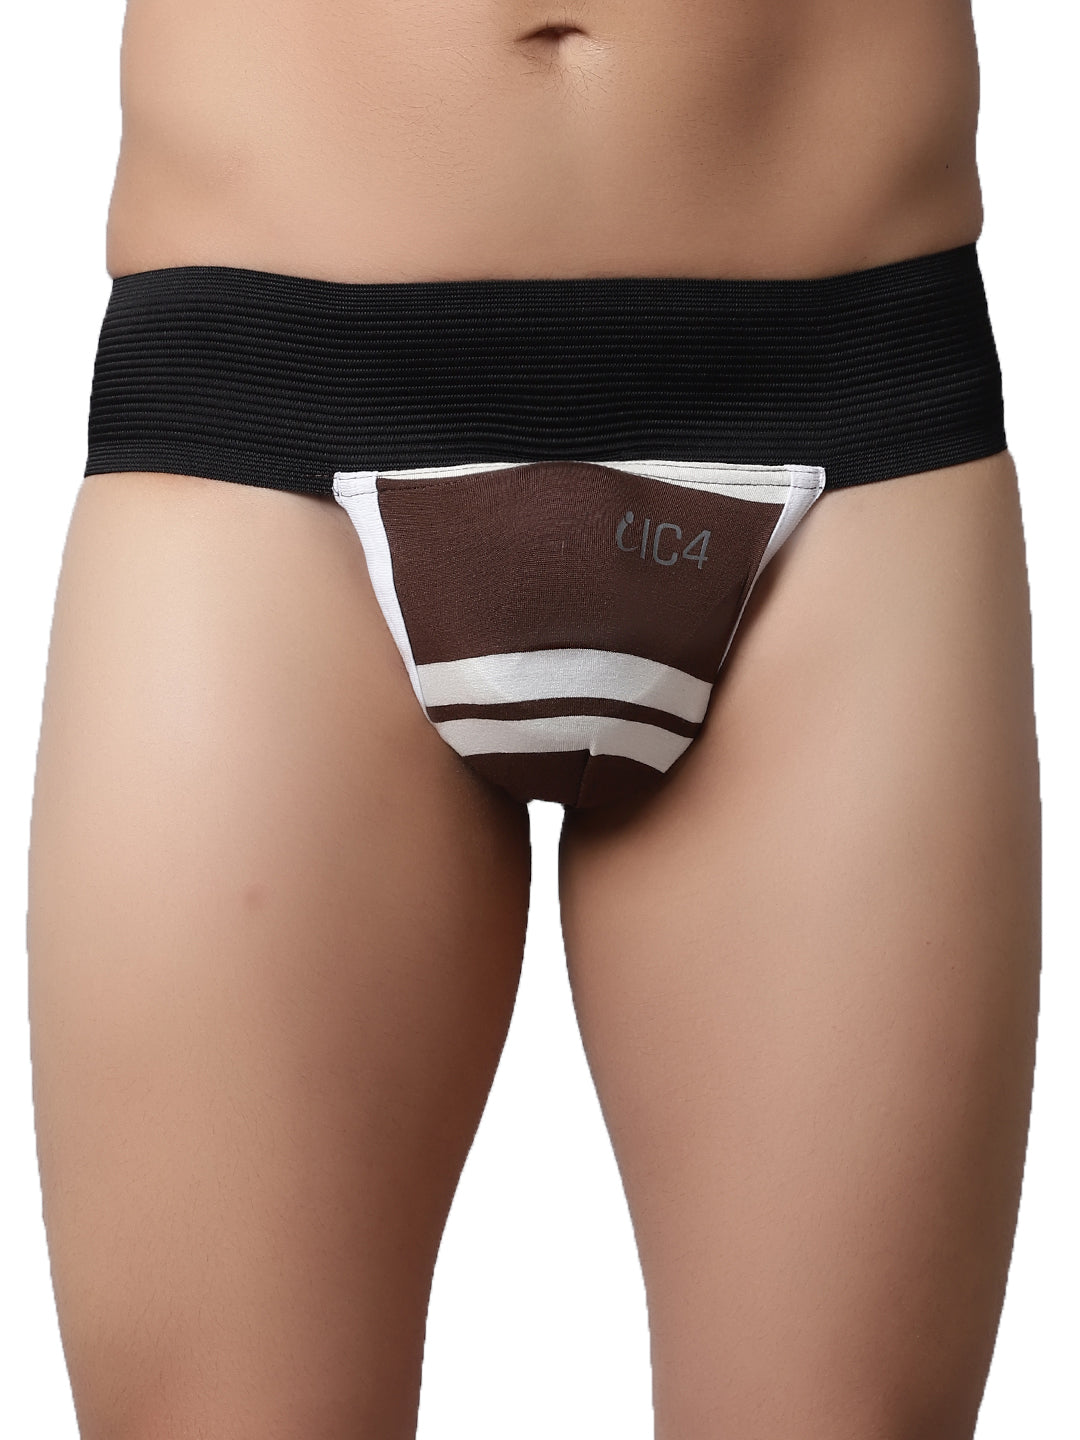 IC4 Men's stripe Gym Supporter Combo Pack of 2 - Brown